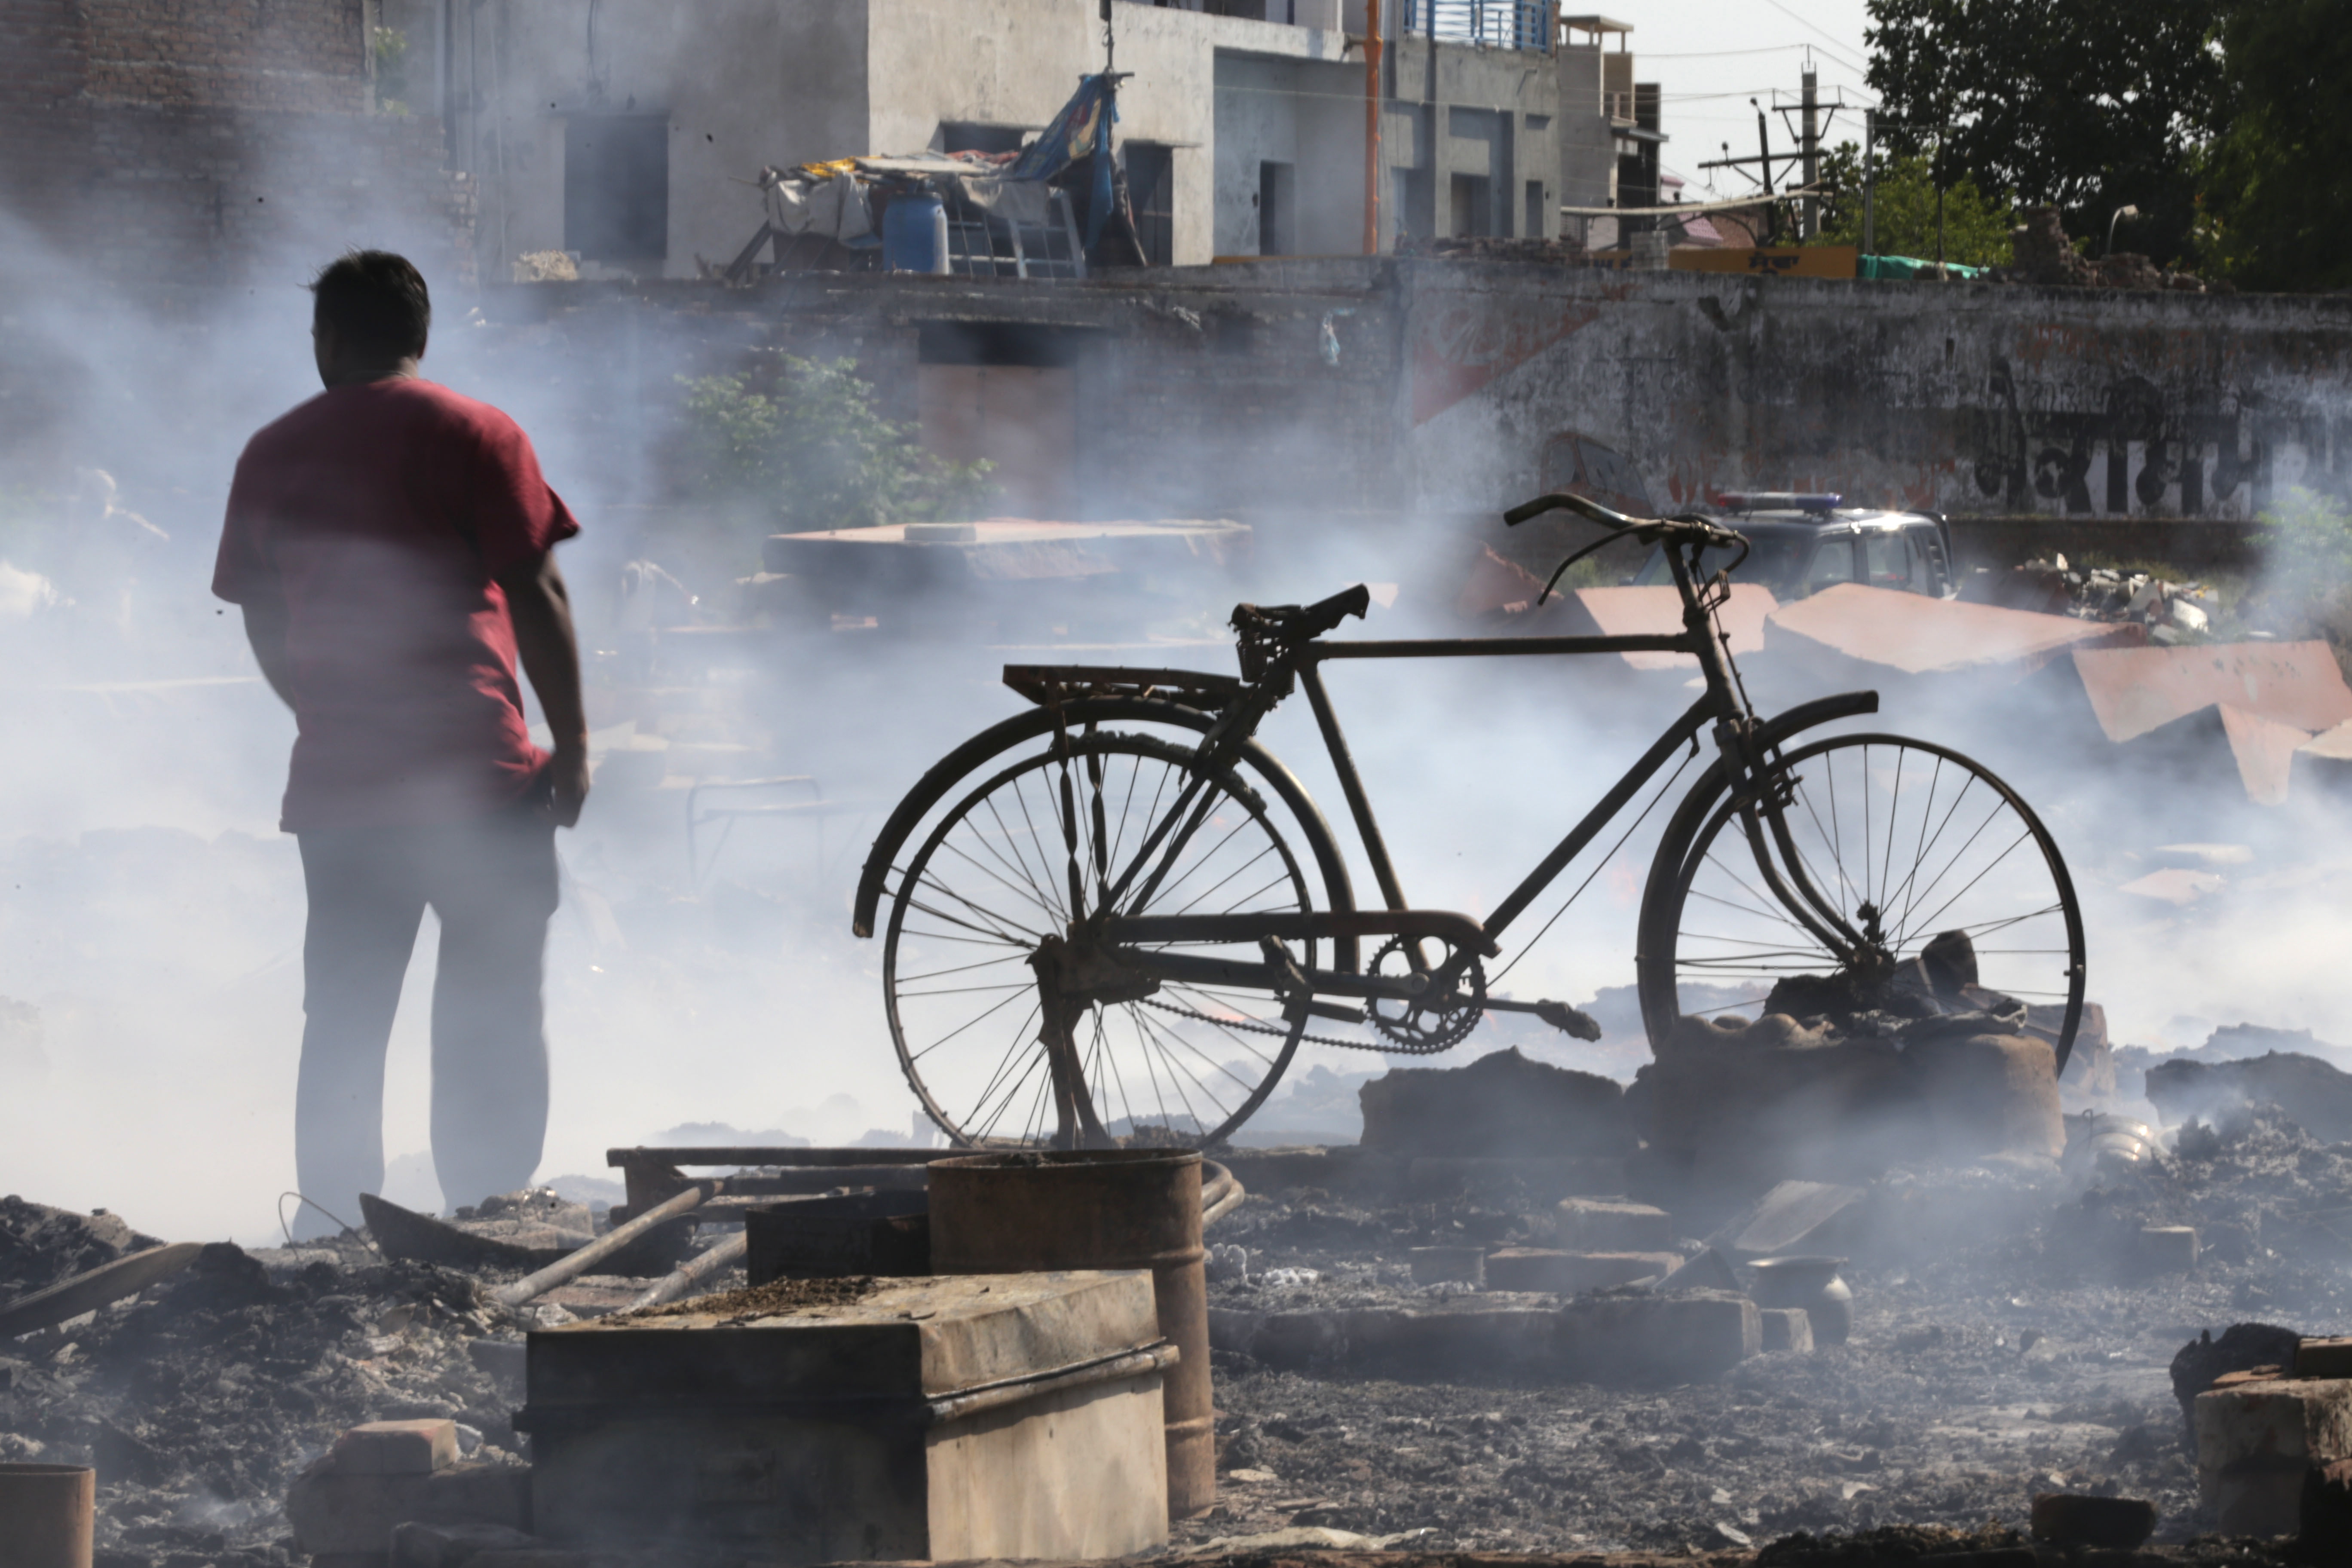 epa07677268 An Indian man searches for his belongings after a fire broke out in a slum area in Amritsar, India, 27 June 2019. According to reports, about 30-40 shanties were burnt in the fire, gutting most of the belongings of the residents. No casualties have been reported so far in the mishap.  EPA/RAMINDER PAL SINGH